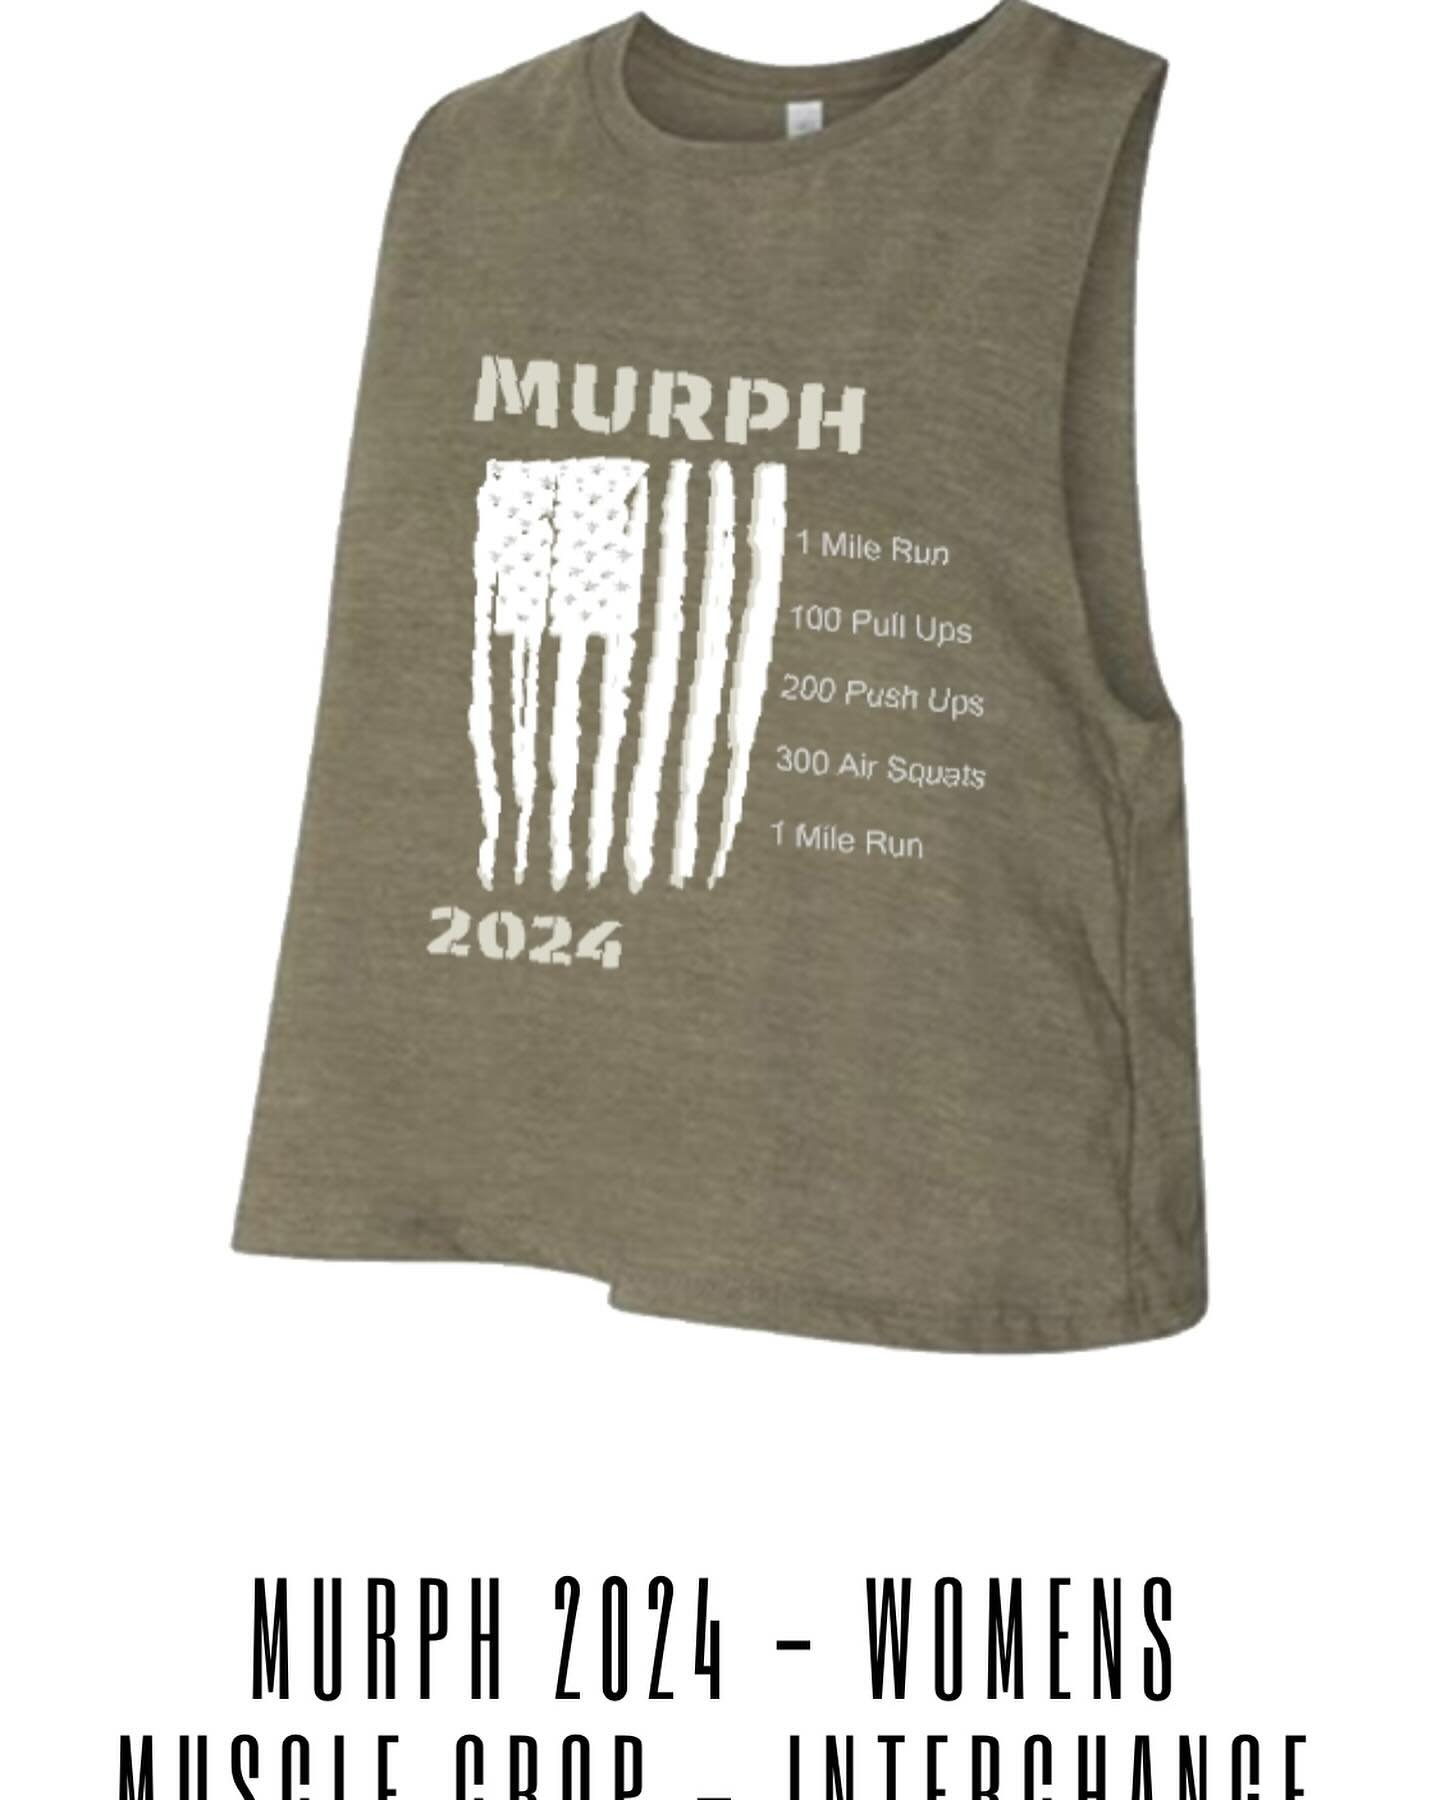 Murph shirts are now available!  Order by May 17 to have them for our Memorial Day WOD. Link to order is on the bottom of our website.